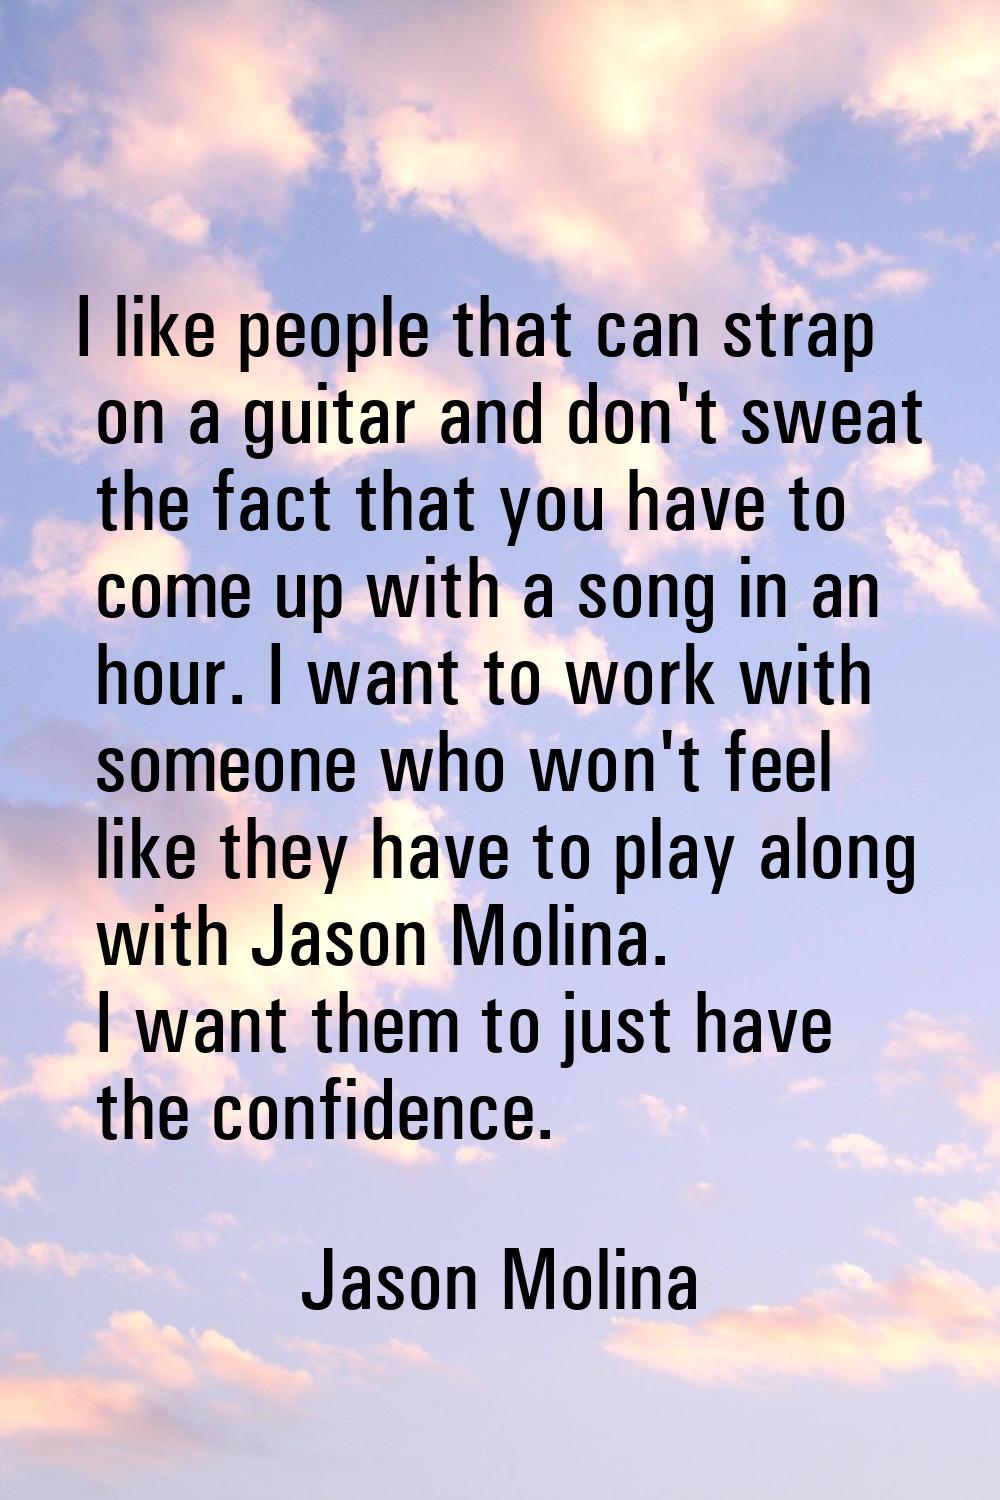 I like people that can strap on a guitar and don't sweat the fact that you have to come up with a s